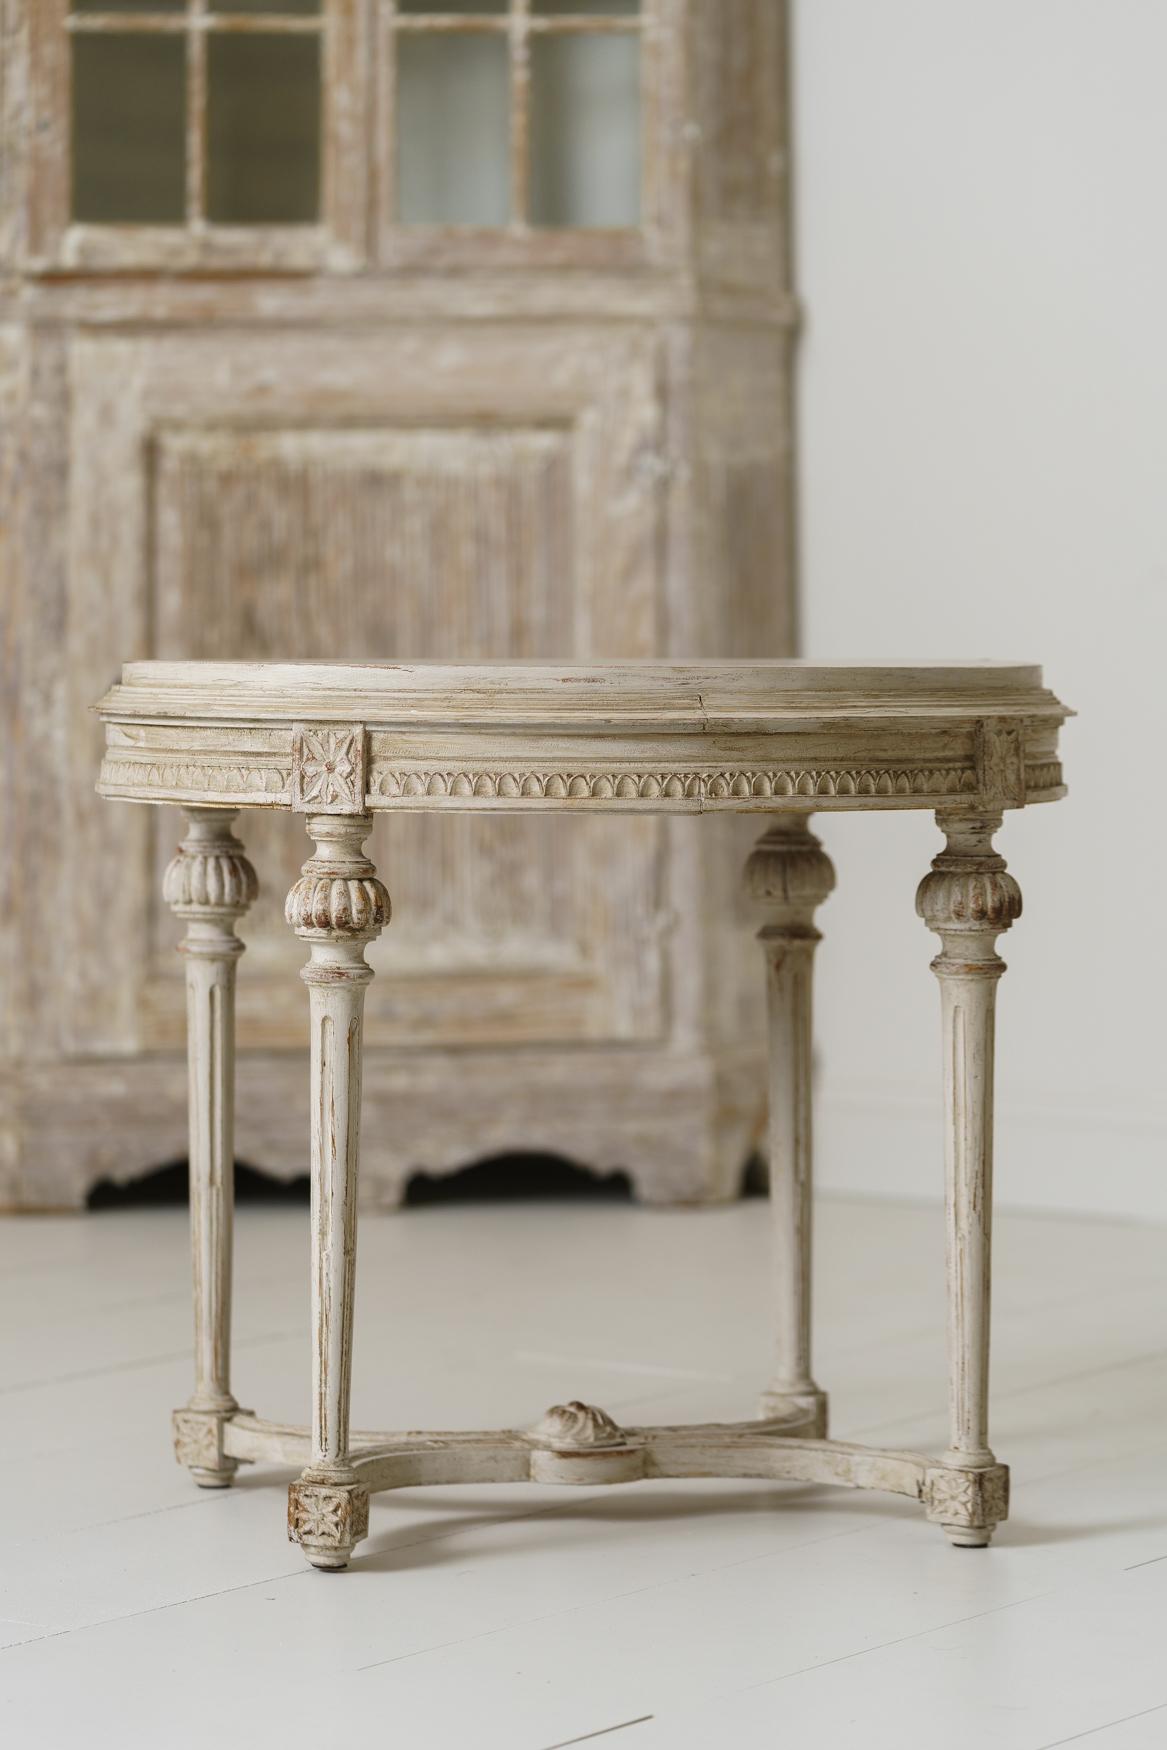 A beautifully carved Swedish late Gustavian period table. The apron features egg and dart detail. There are carved rosettes above fluted, round caps, ending in tapered and fluted legs. A lovely and versatile table.